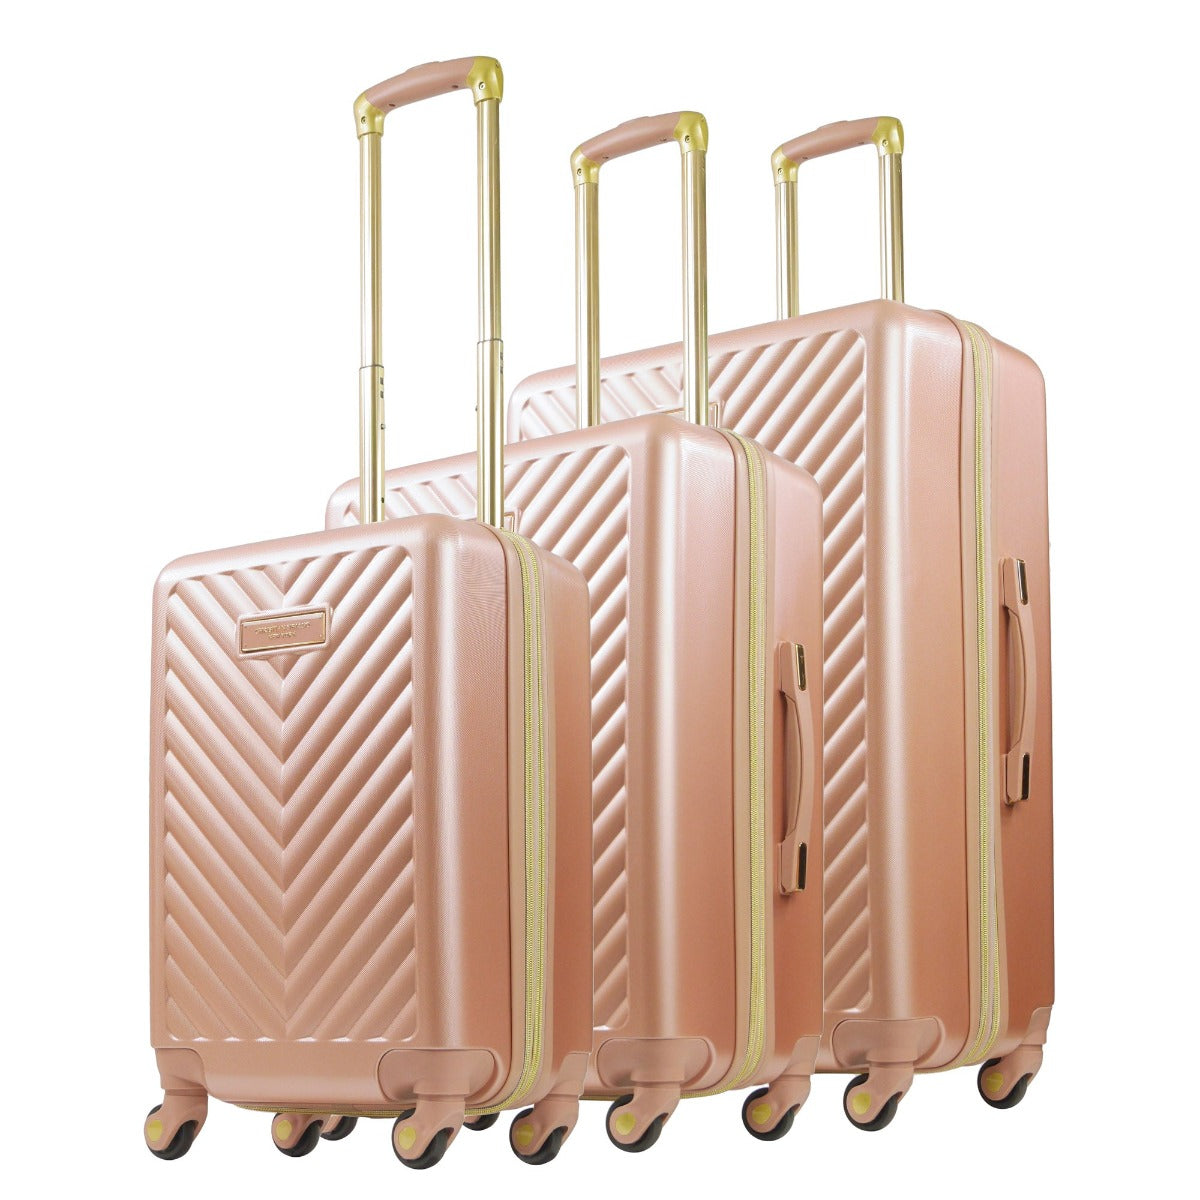 Christian Siriano New York Addie rose gold 3 piece luggage set - best durable suitcases for travel